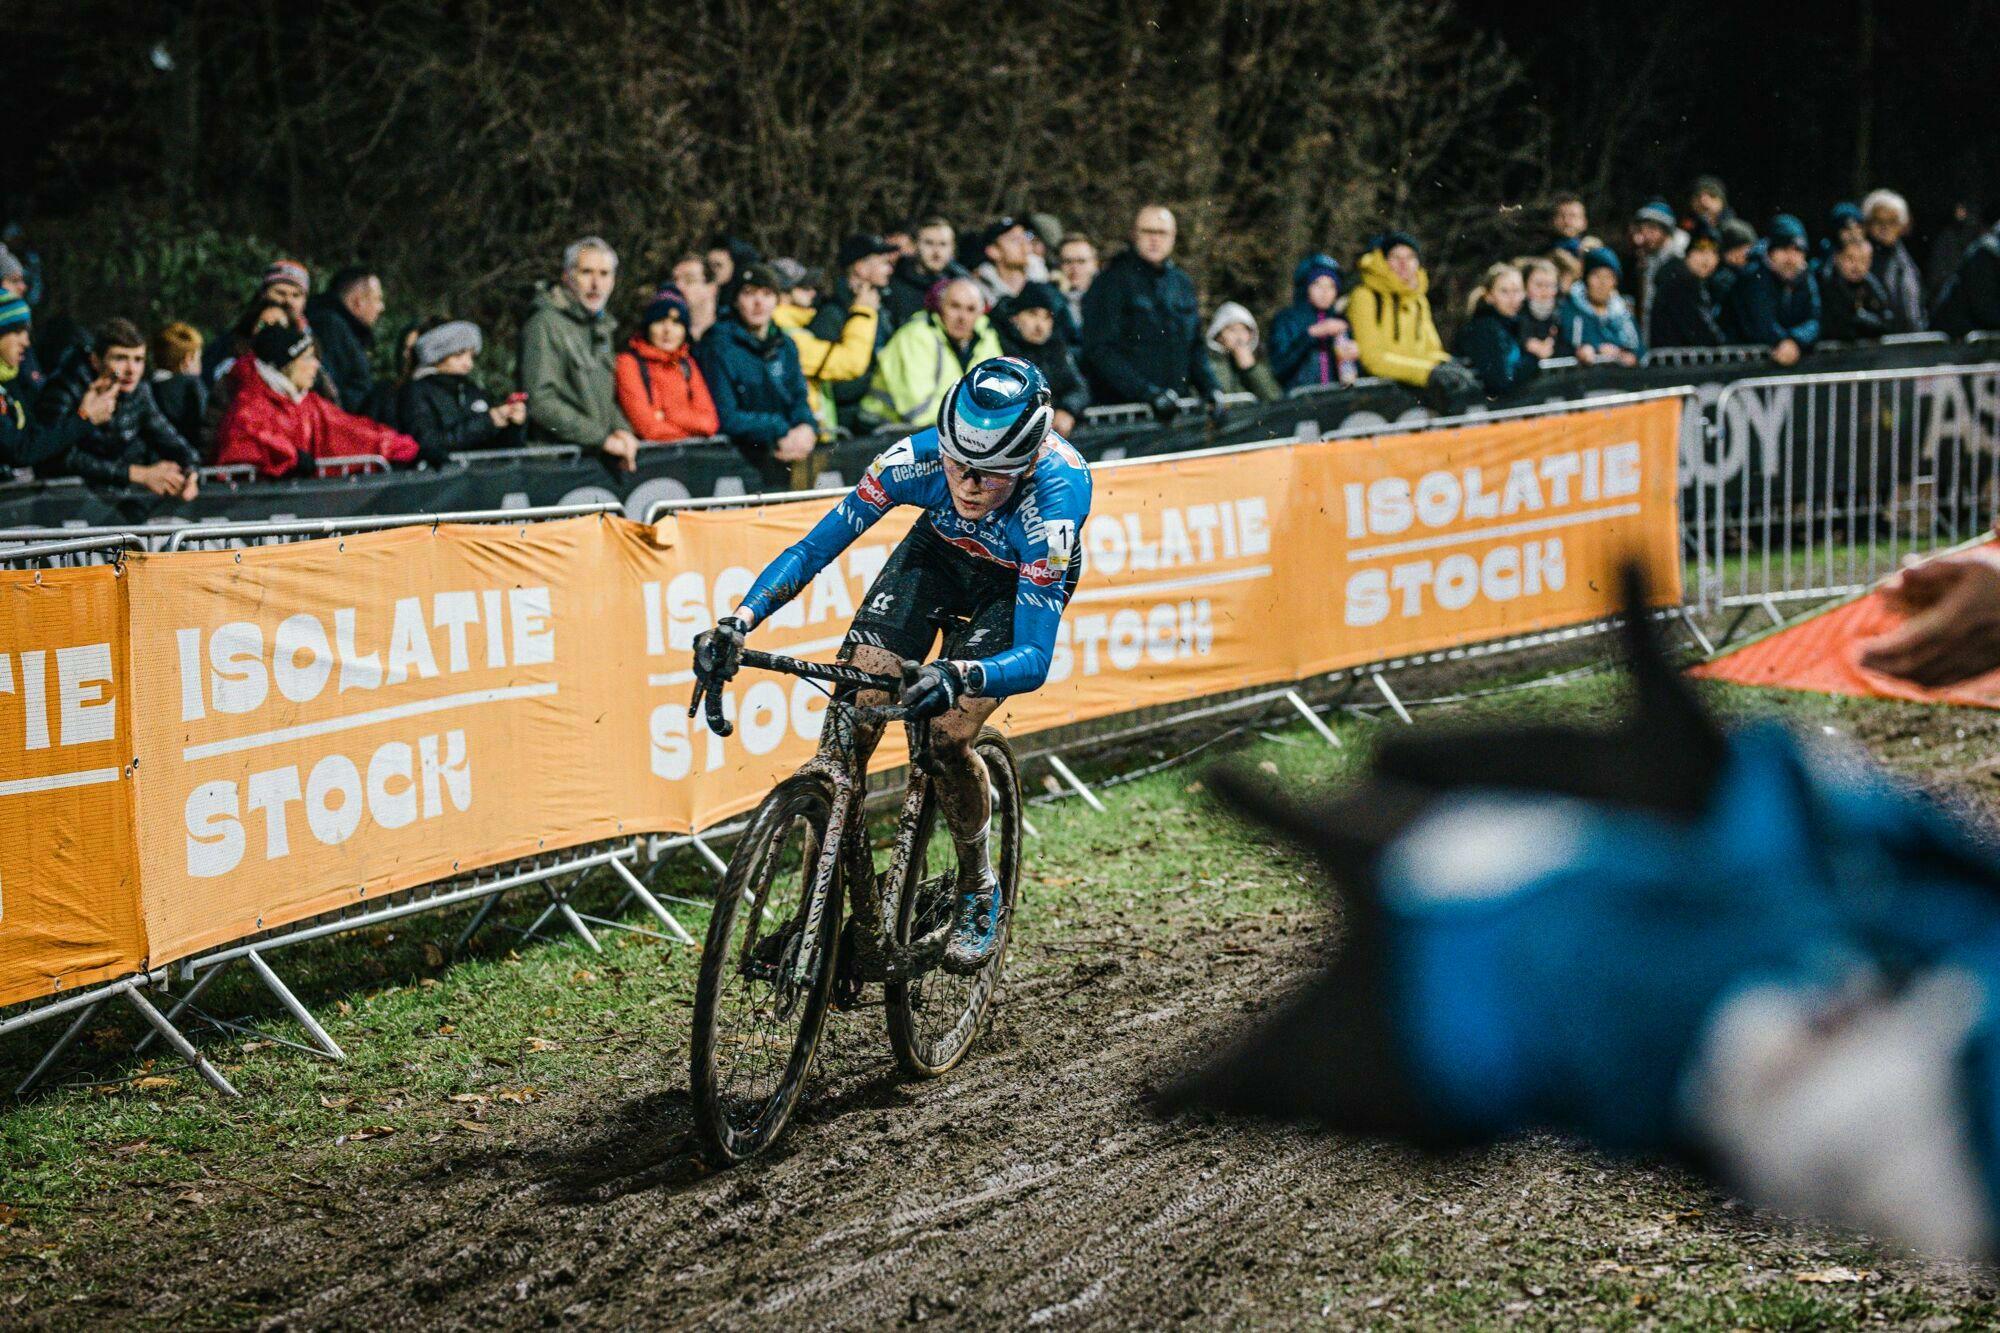 A supreme Pieterse solos to victory, van Aert triumphs after an exciting battle in Diegem